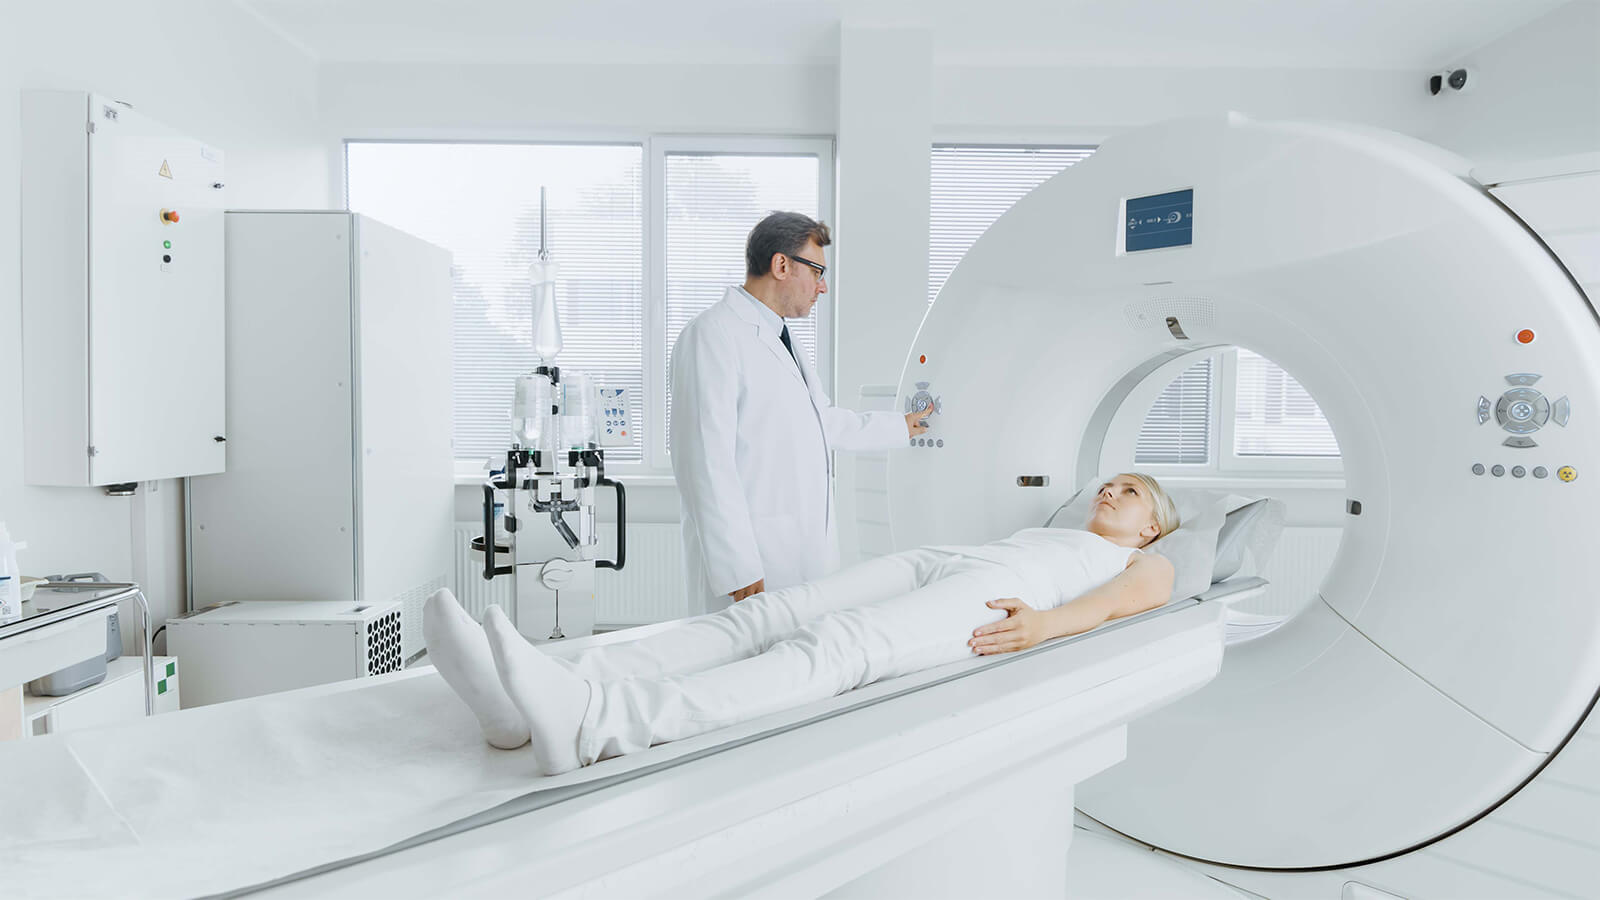 PET Scan vs. CT Scan: What’s the Difference?